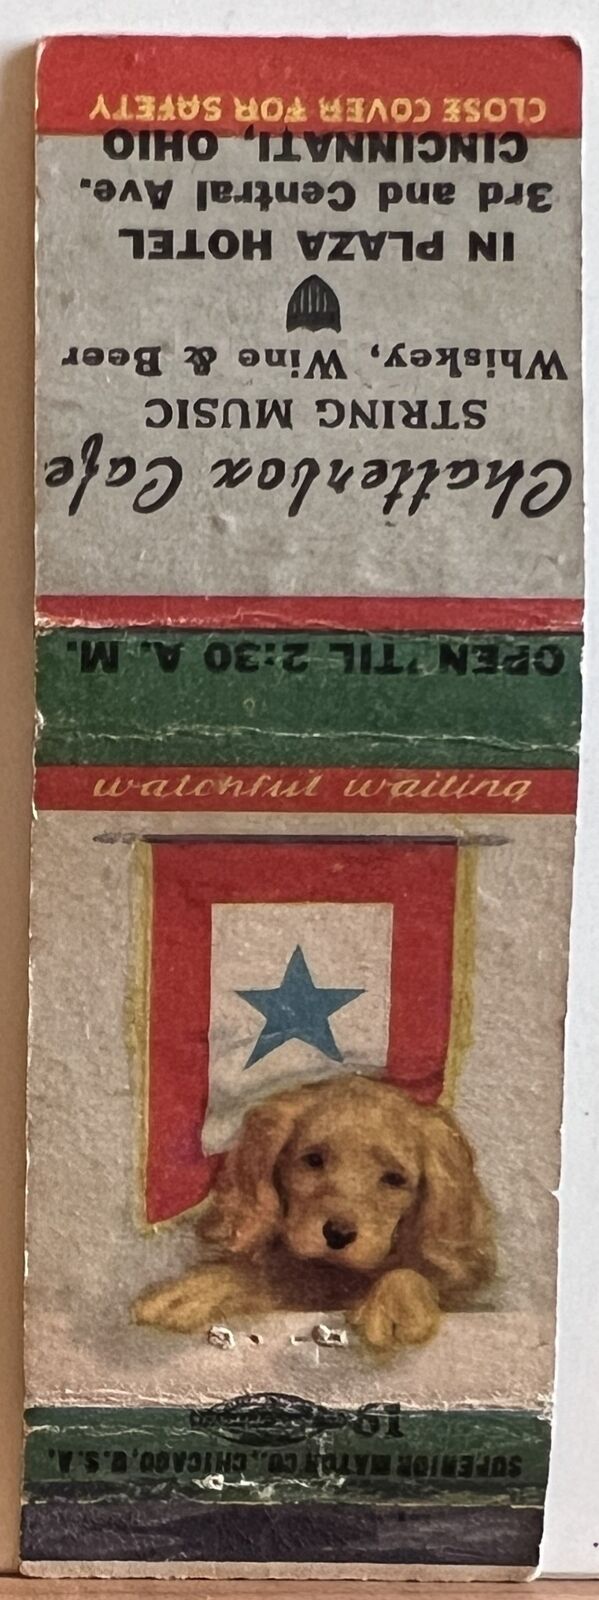 Chatterbox Cafe Cincinnati OH Ohio Blue Star Service Banner Matchbook Cover